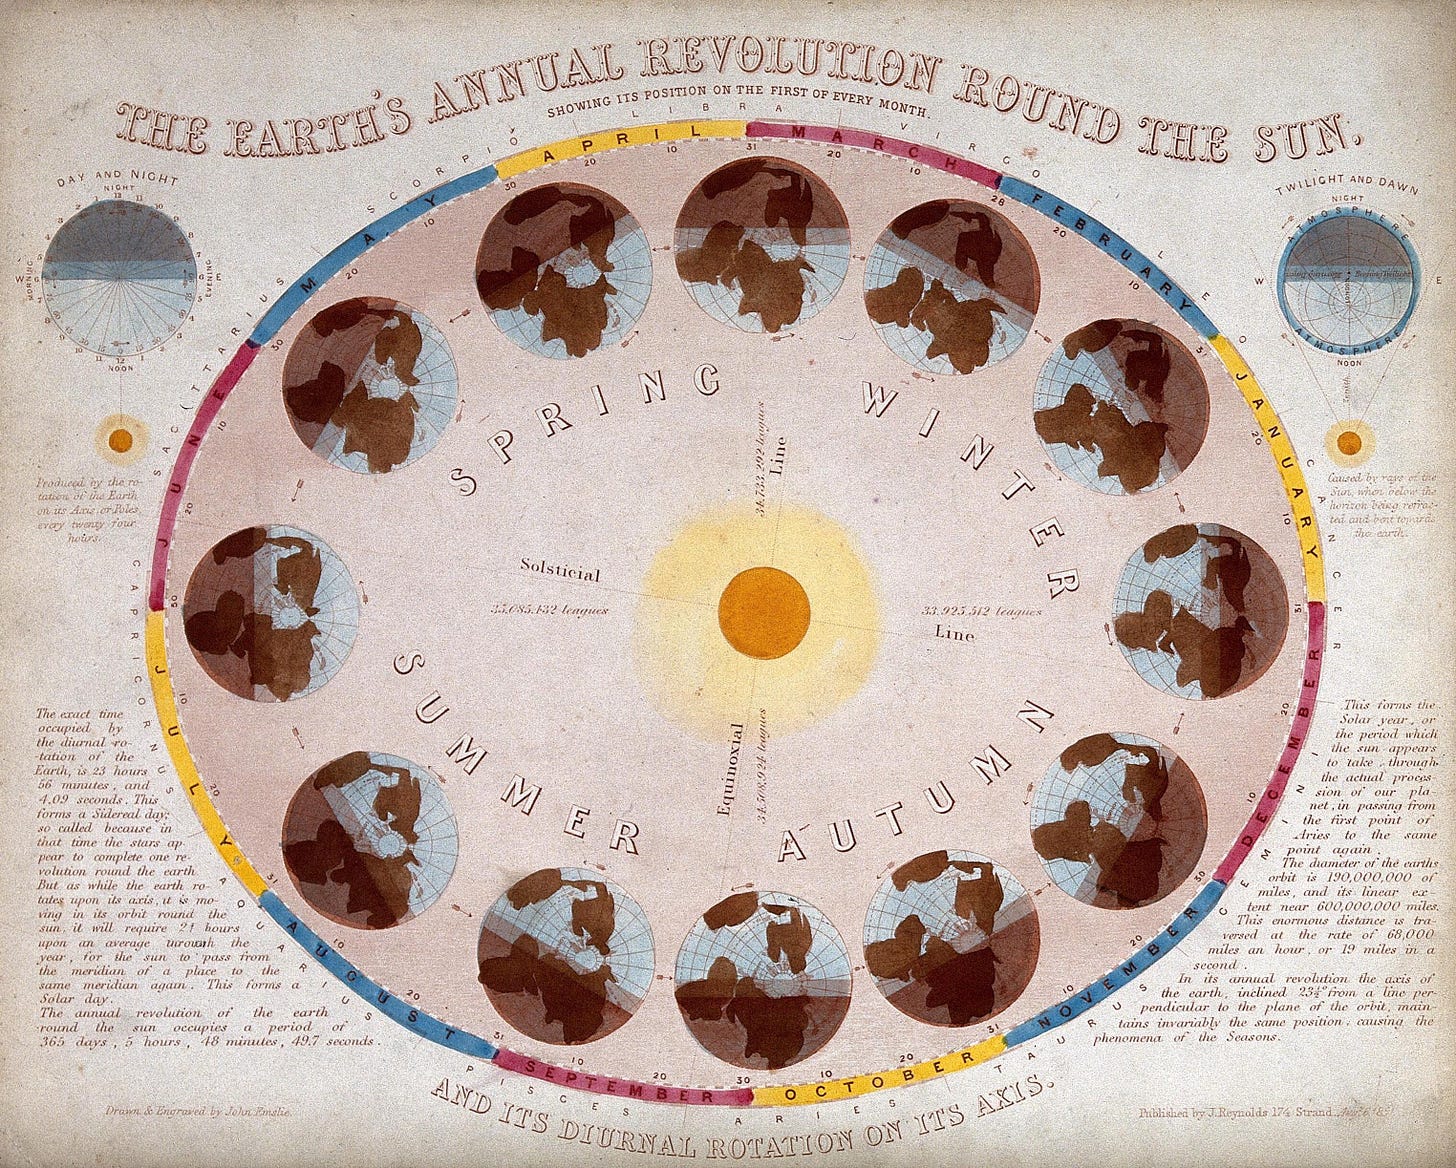 A diagram showing the Earth's annual travel around the sun.